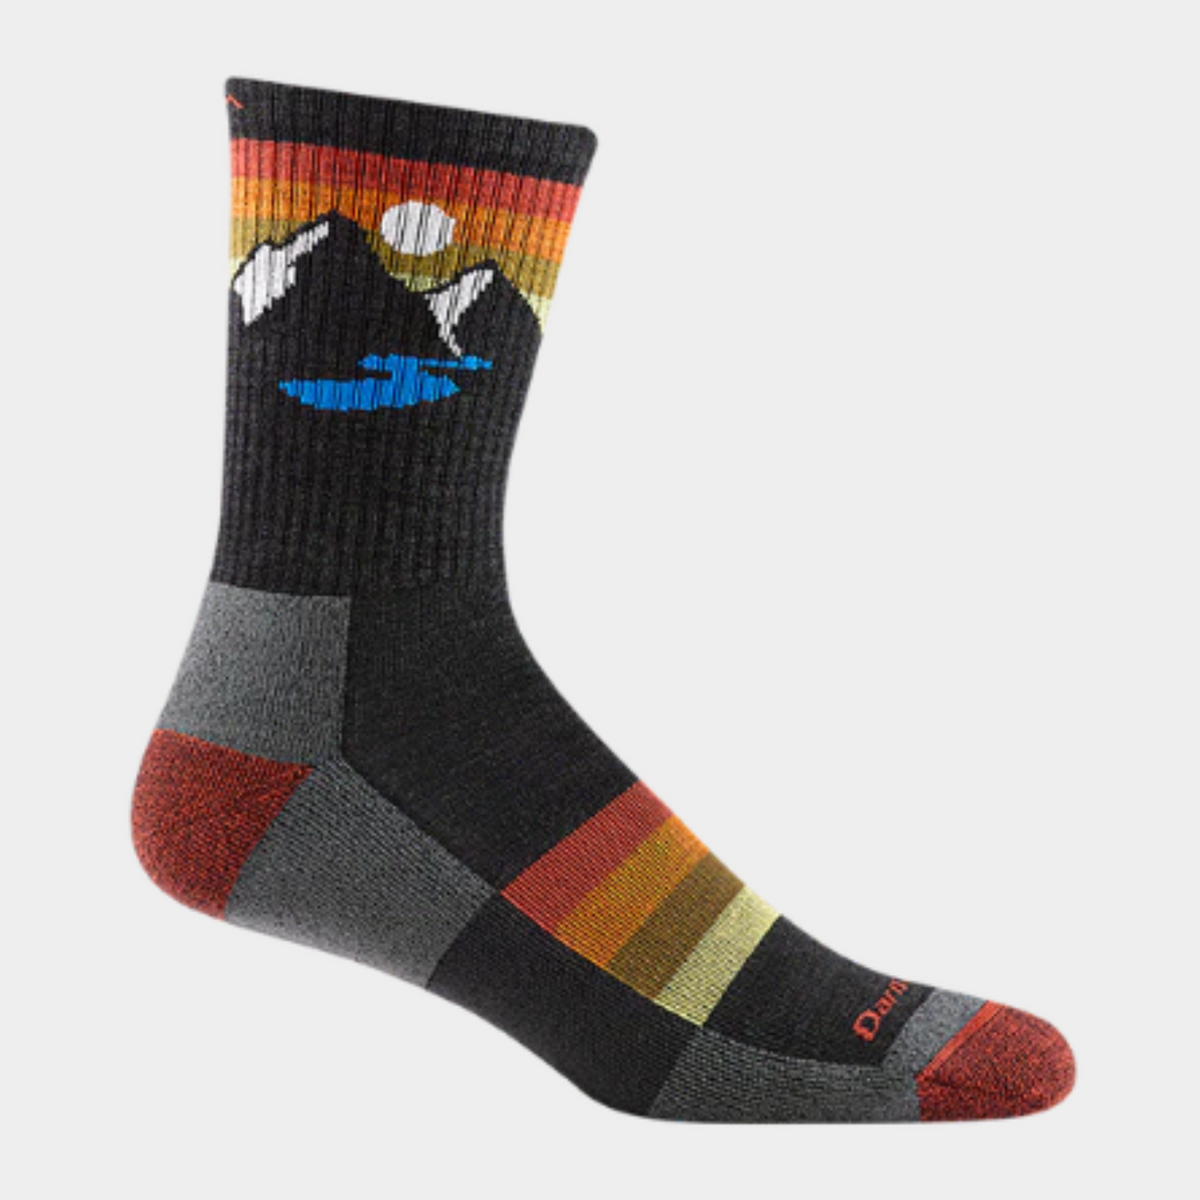 Darn Tough 1997 Sunset Ridge Micro Crew Lightweight Cushion Hike men&#39;s sock featuring stripes, mountains, a river, and a moon on display